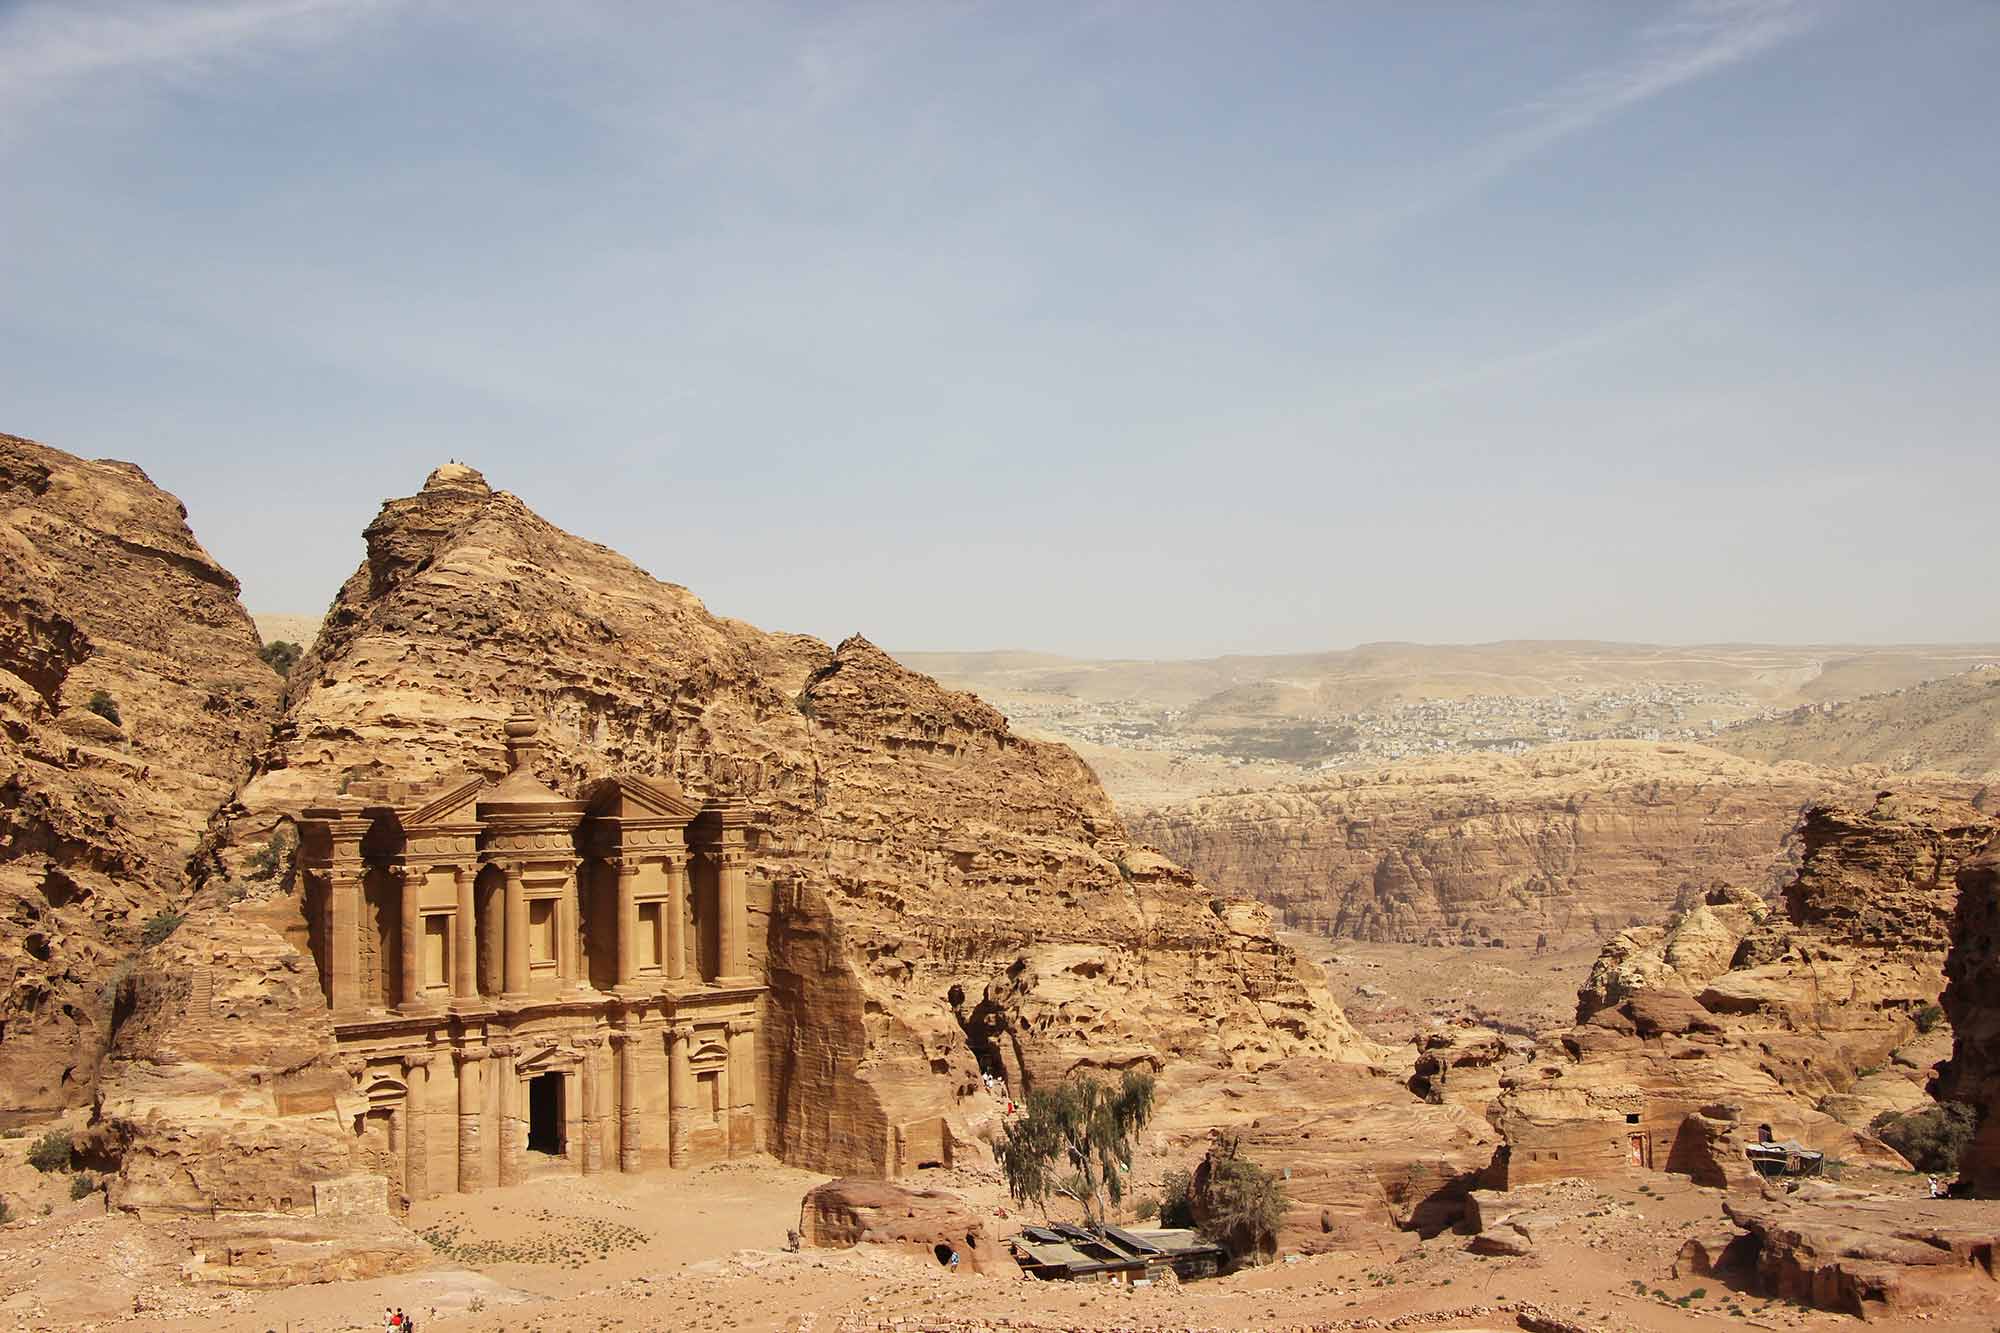 View of Petra’s Monastery (Al Deir), against a valley backdrop